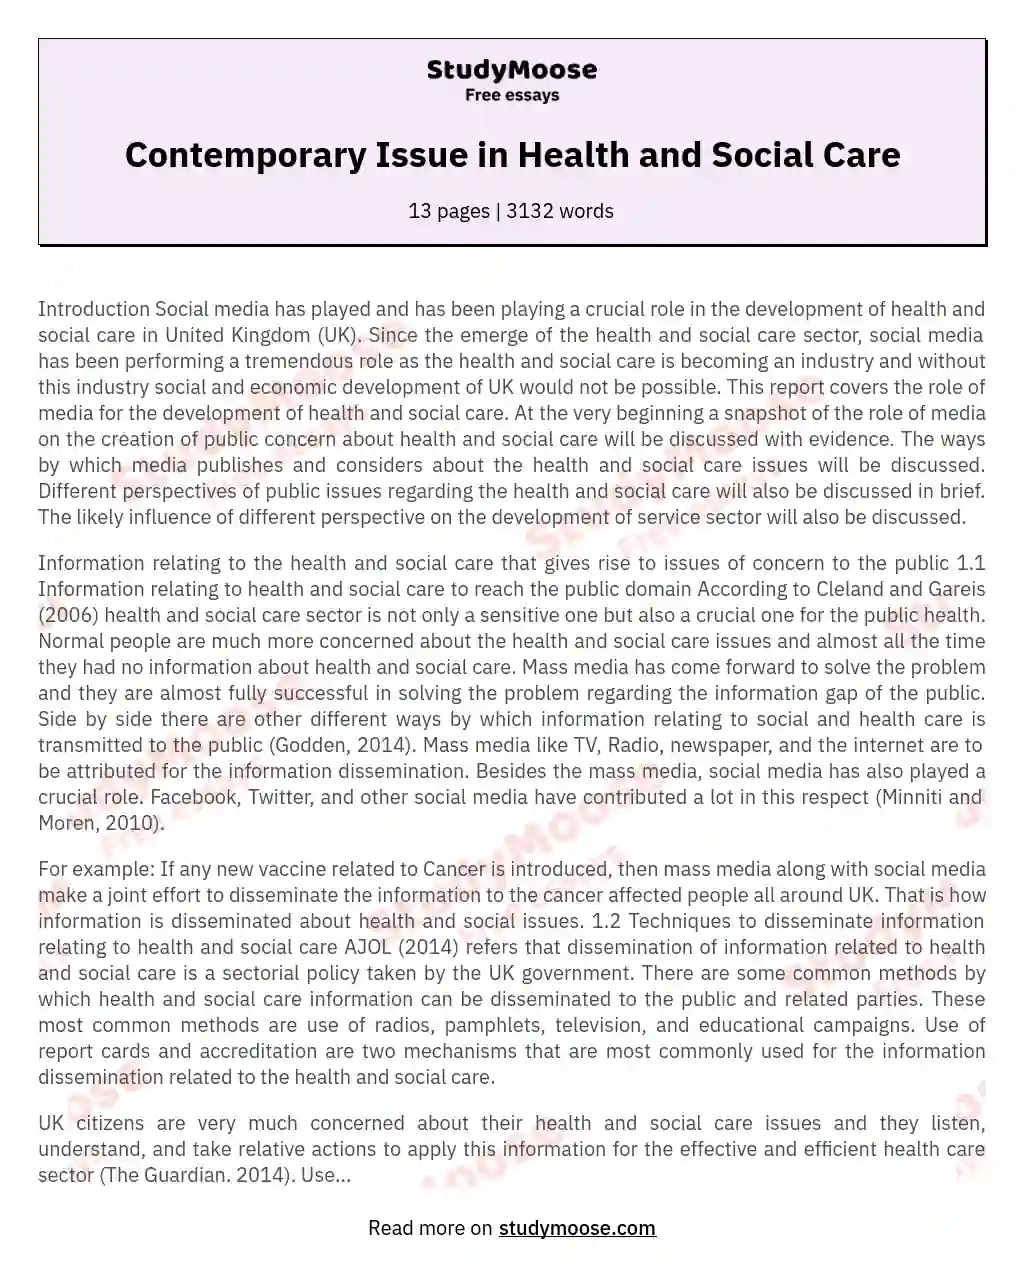 Contemporary Issue in Health and Social Care essay